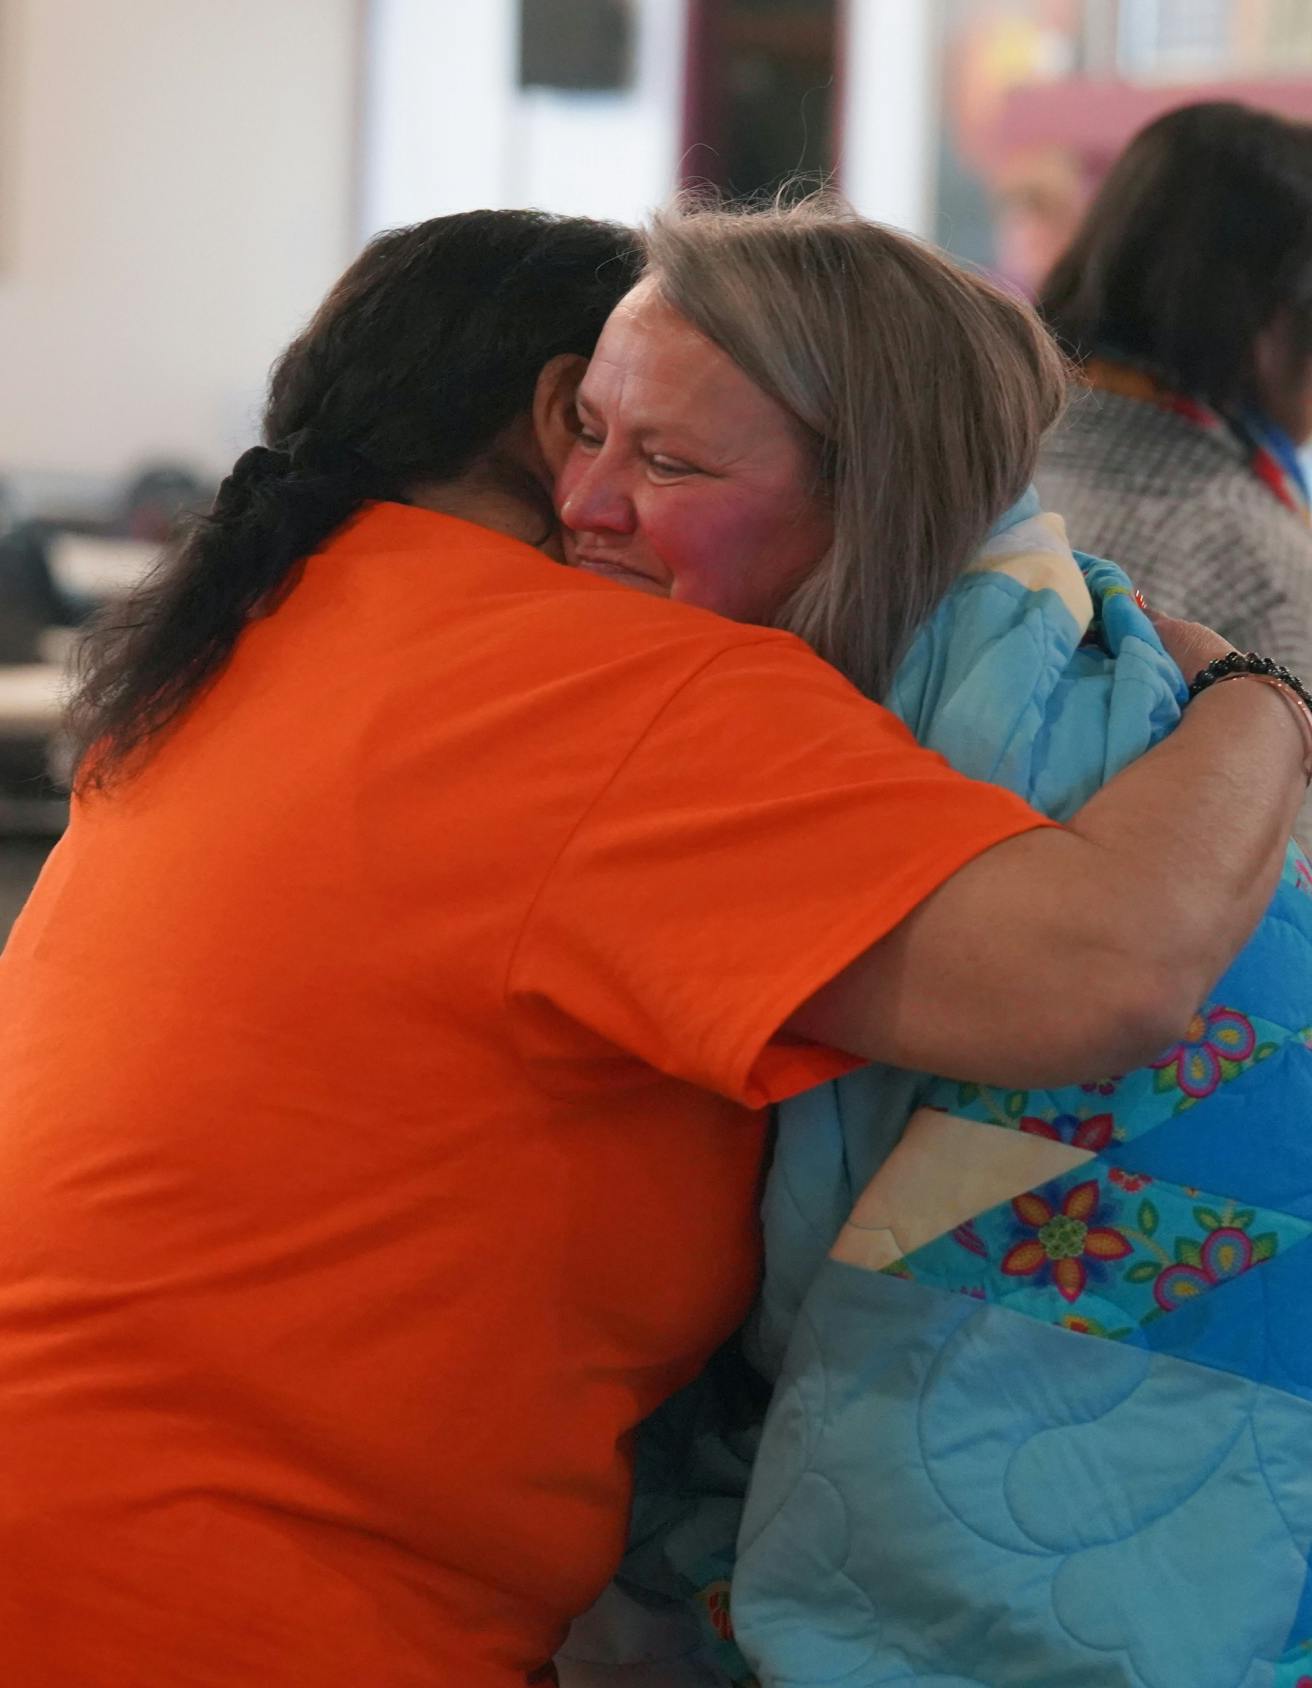 Woman in orange shirt hugging another woman wrapped in a star blanket